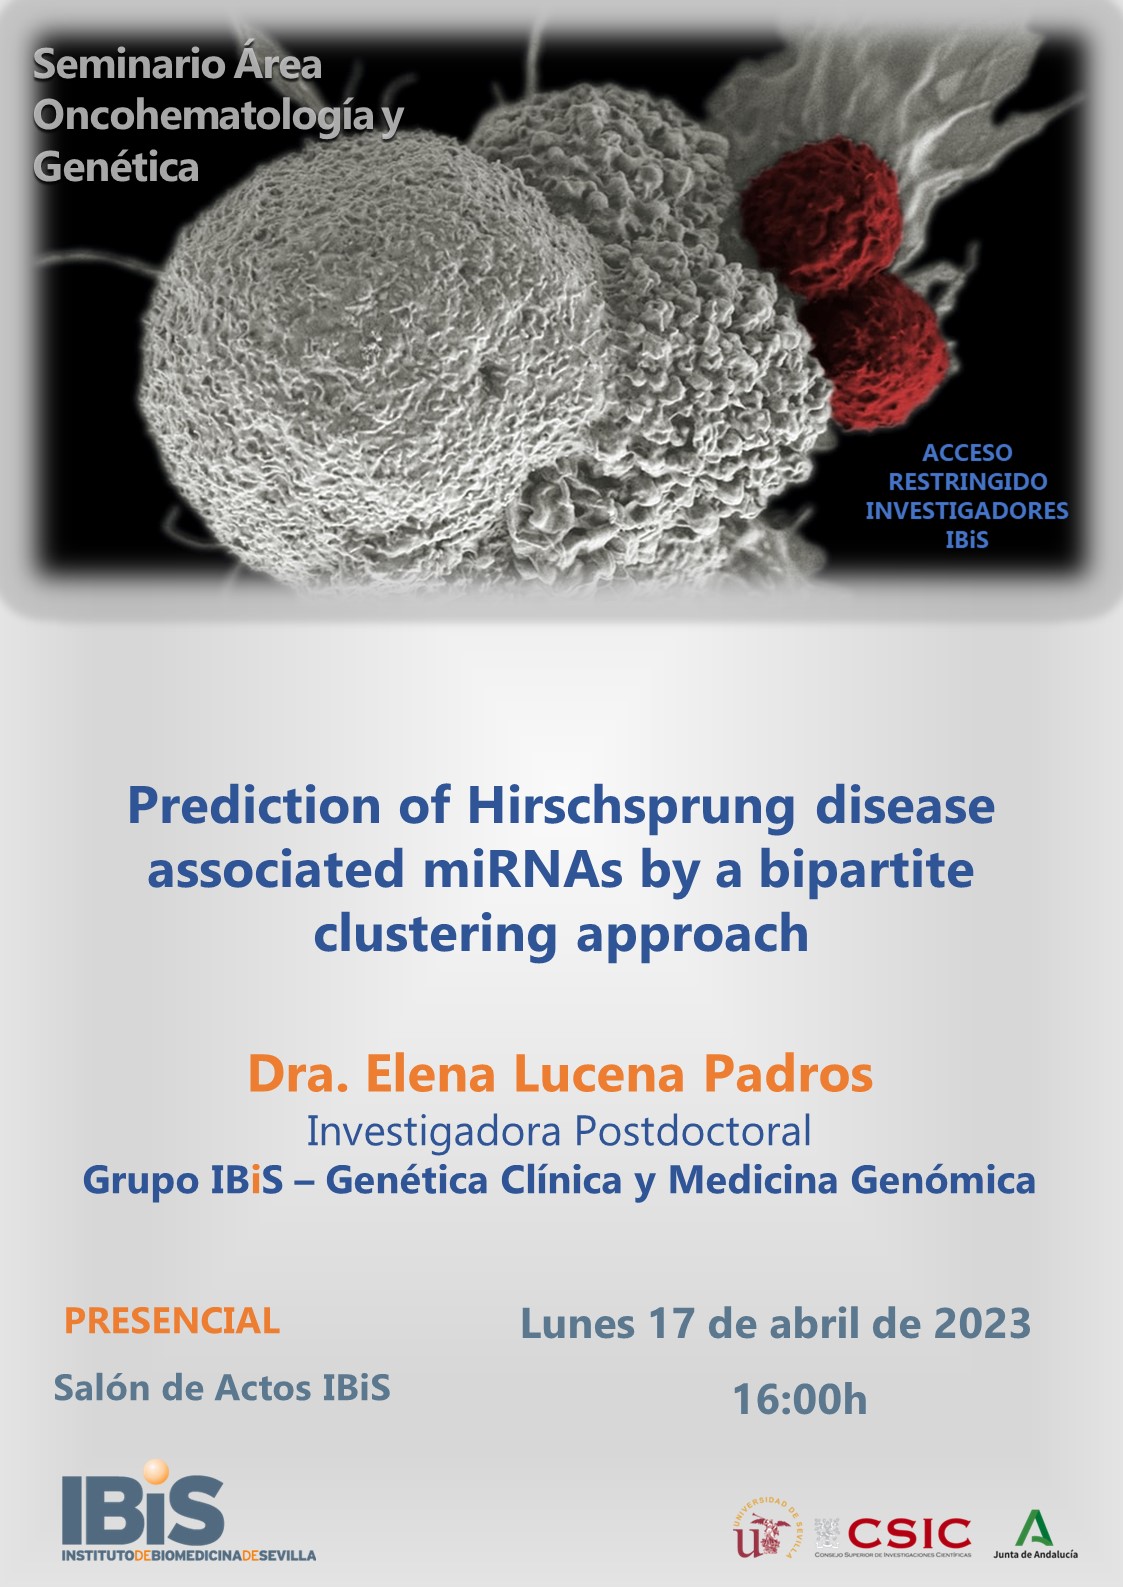 Poster: Prediction of Hirschsprung disease associated miRNAs by a bipartite clustering approach